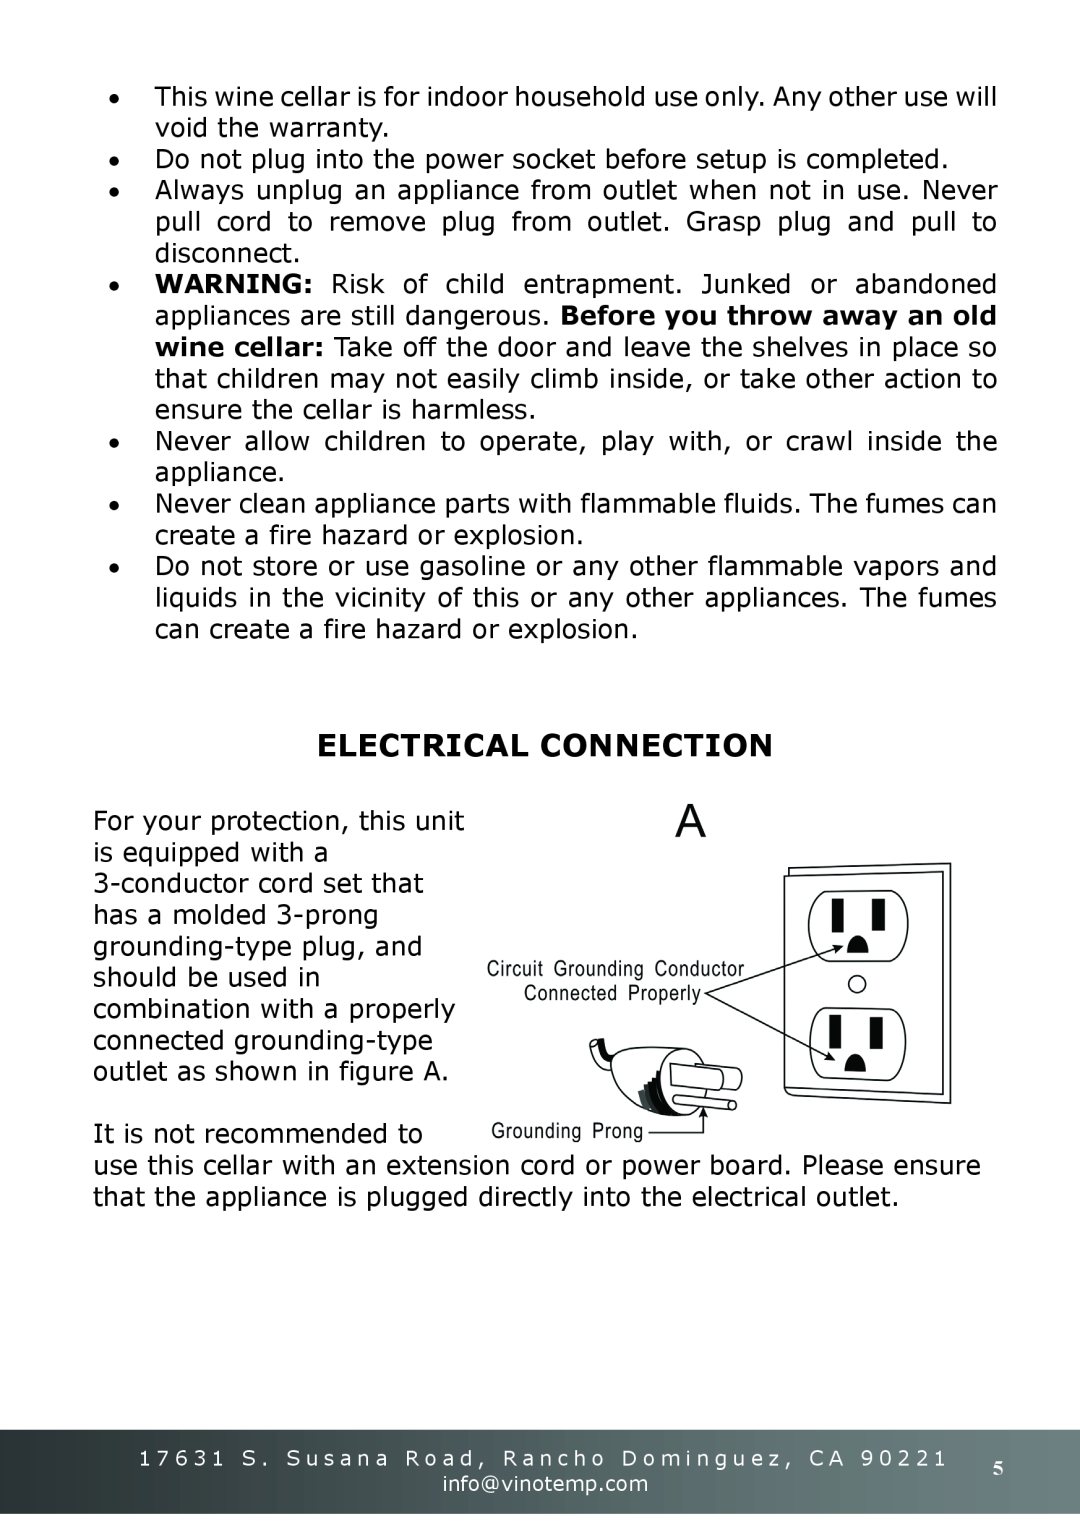 Vinotemp VT-16TEDS owner manual Electrical Connection 